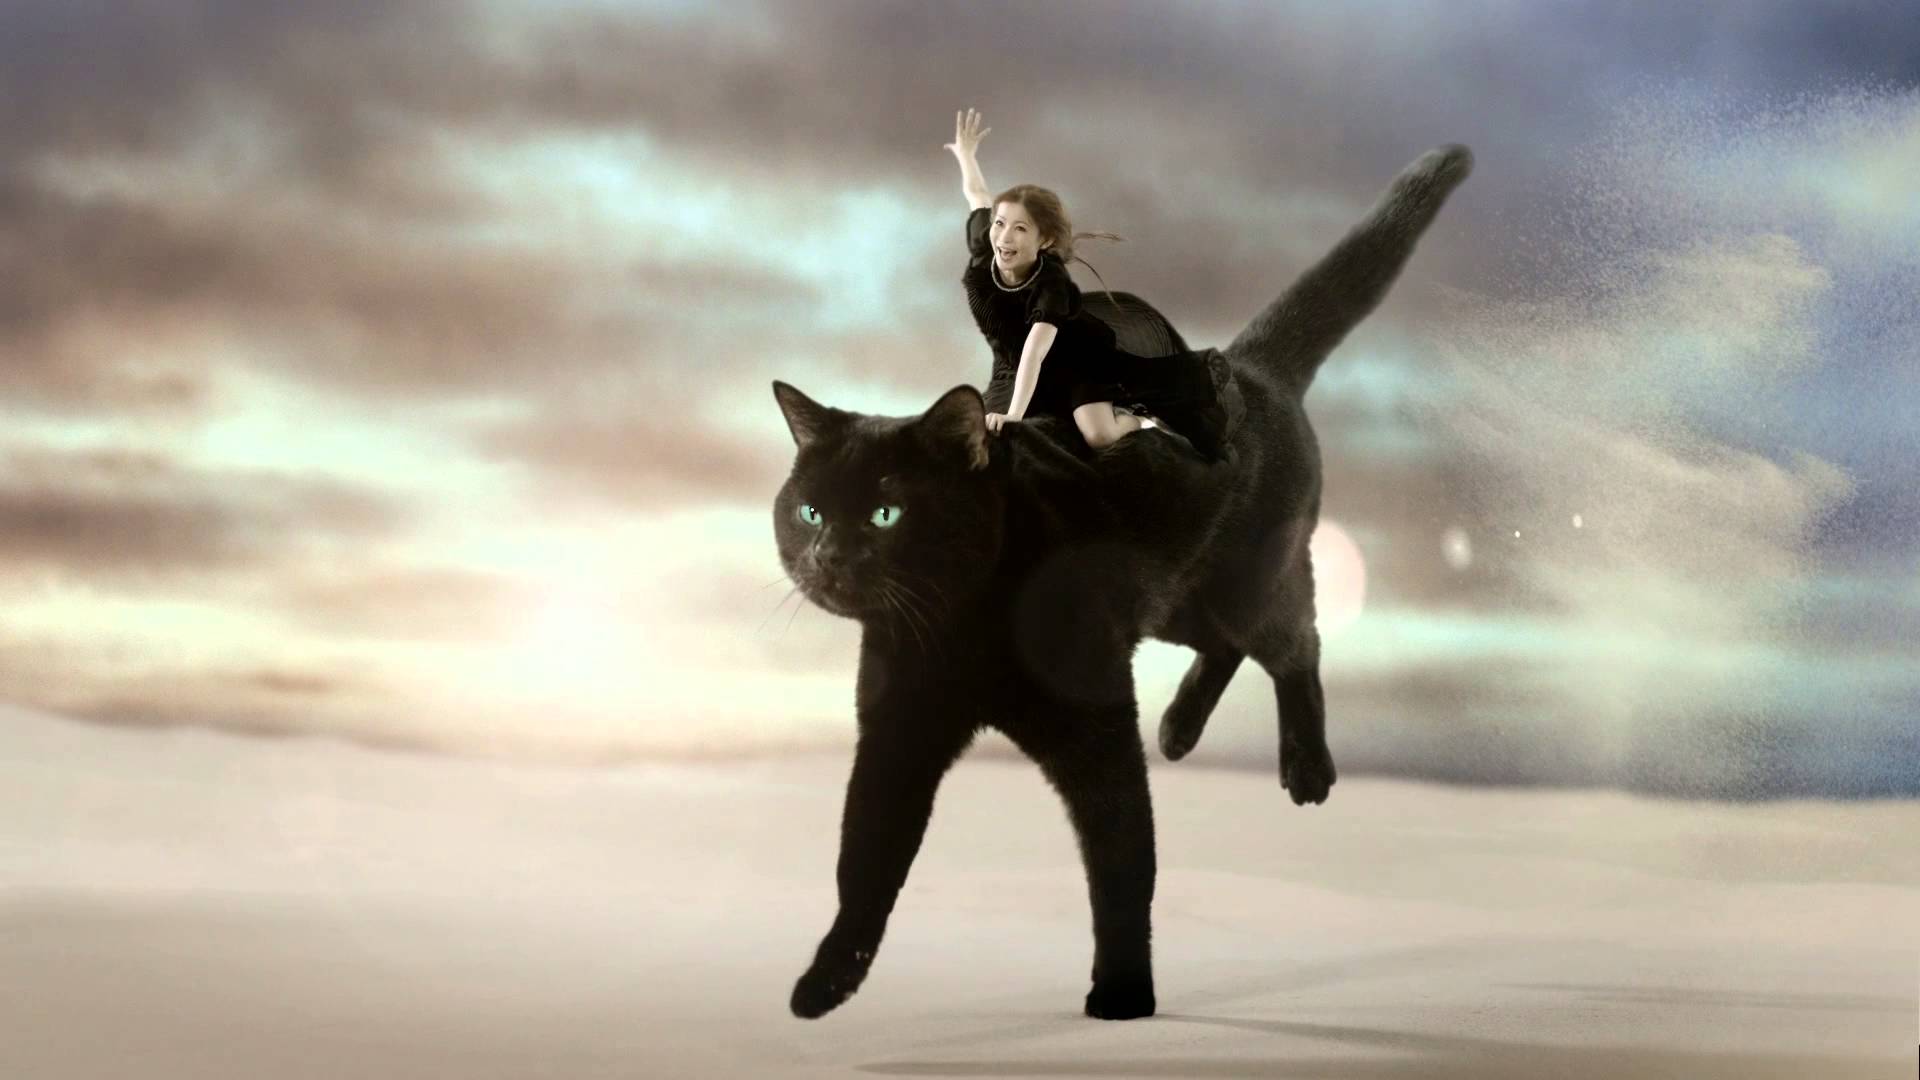 Meow, What is Going on Here? Shoko Nakagawa Rides a Black Cat in a Commercial for  Quiz RPG “Mahoutsukai to Kuroneko Wiz”!